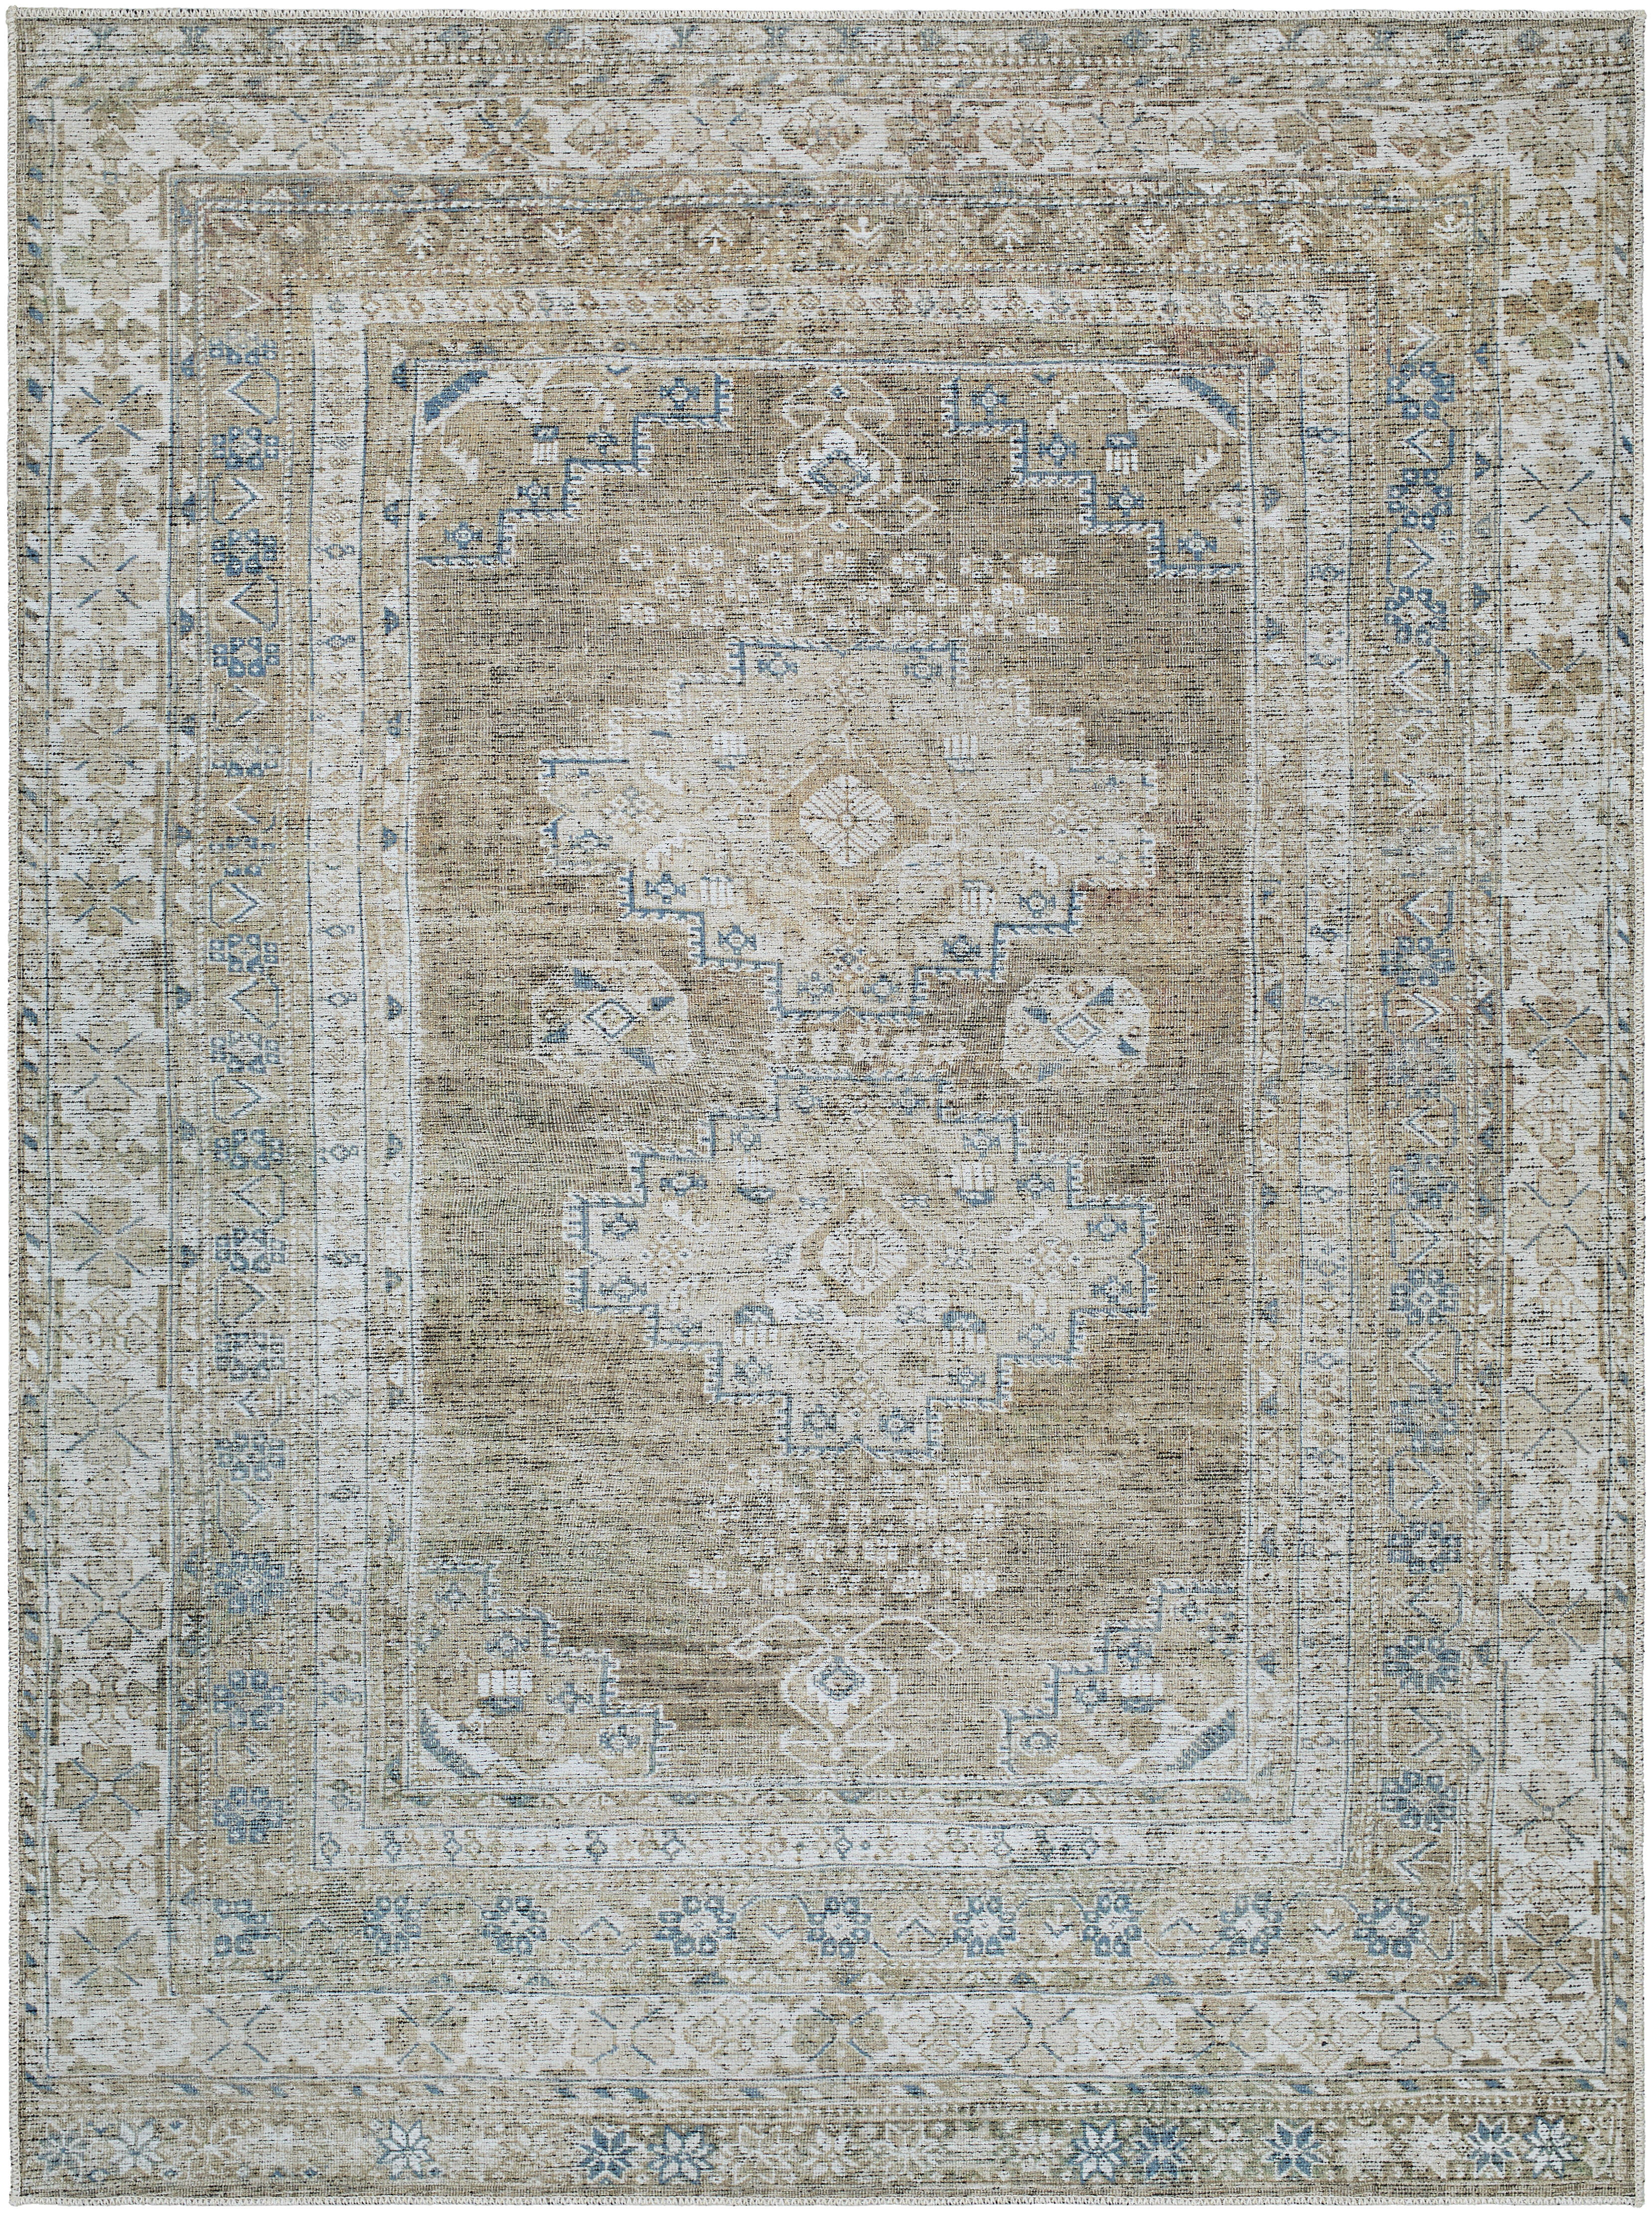 Better Homes & Gardens Geo Medallion Washable Non-Skid Area Rug, Sage, 5'3" x 7' - image 1 of 6